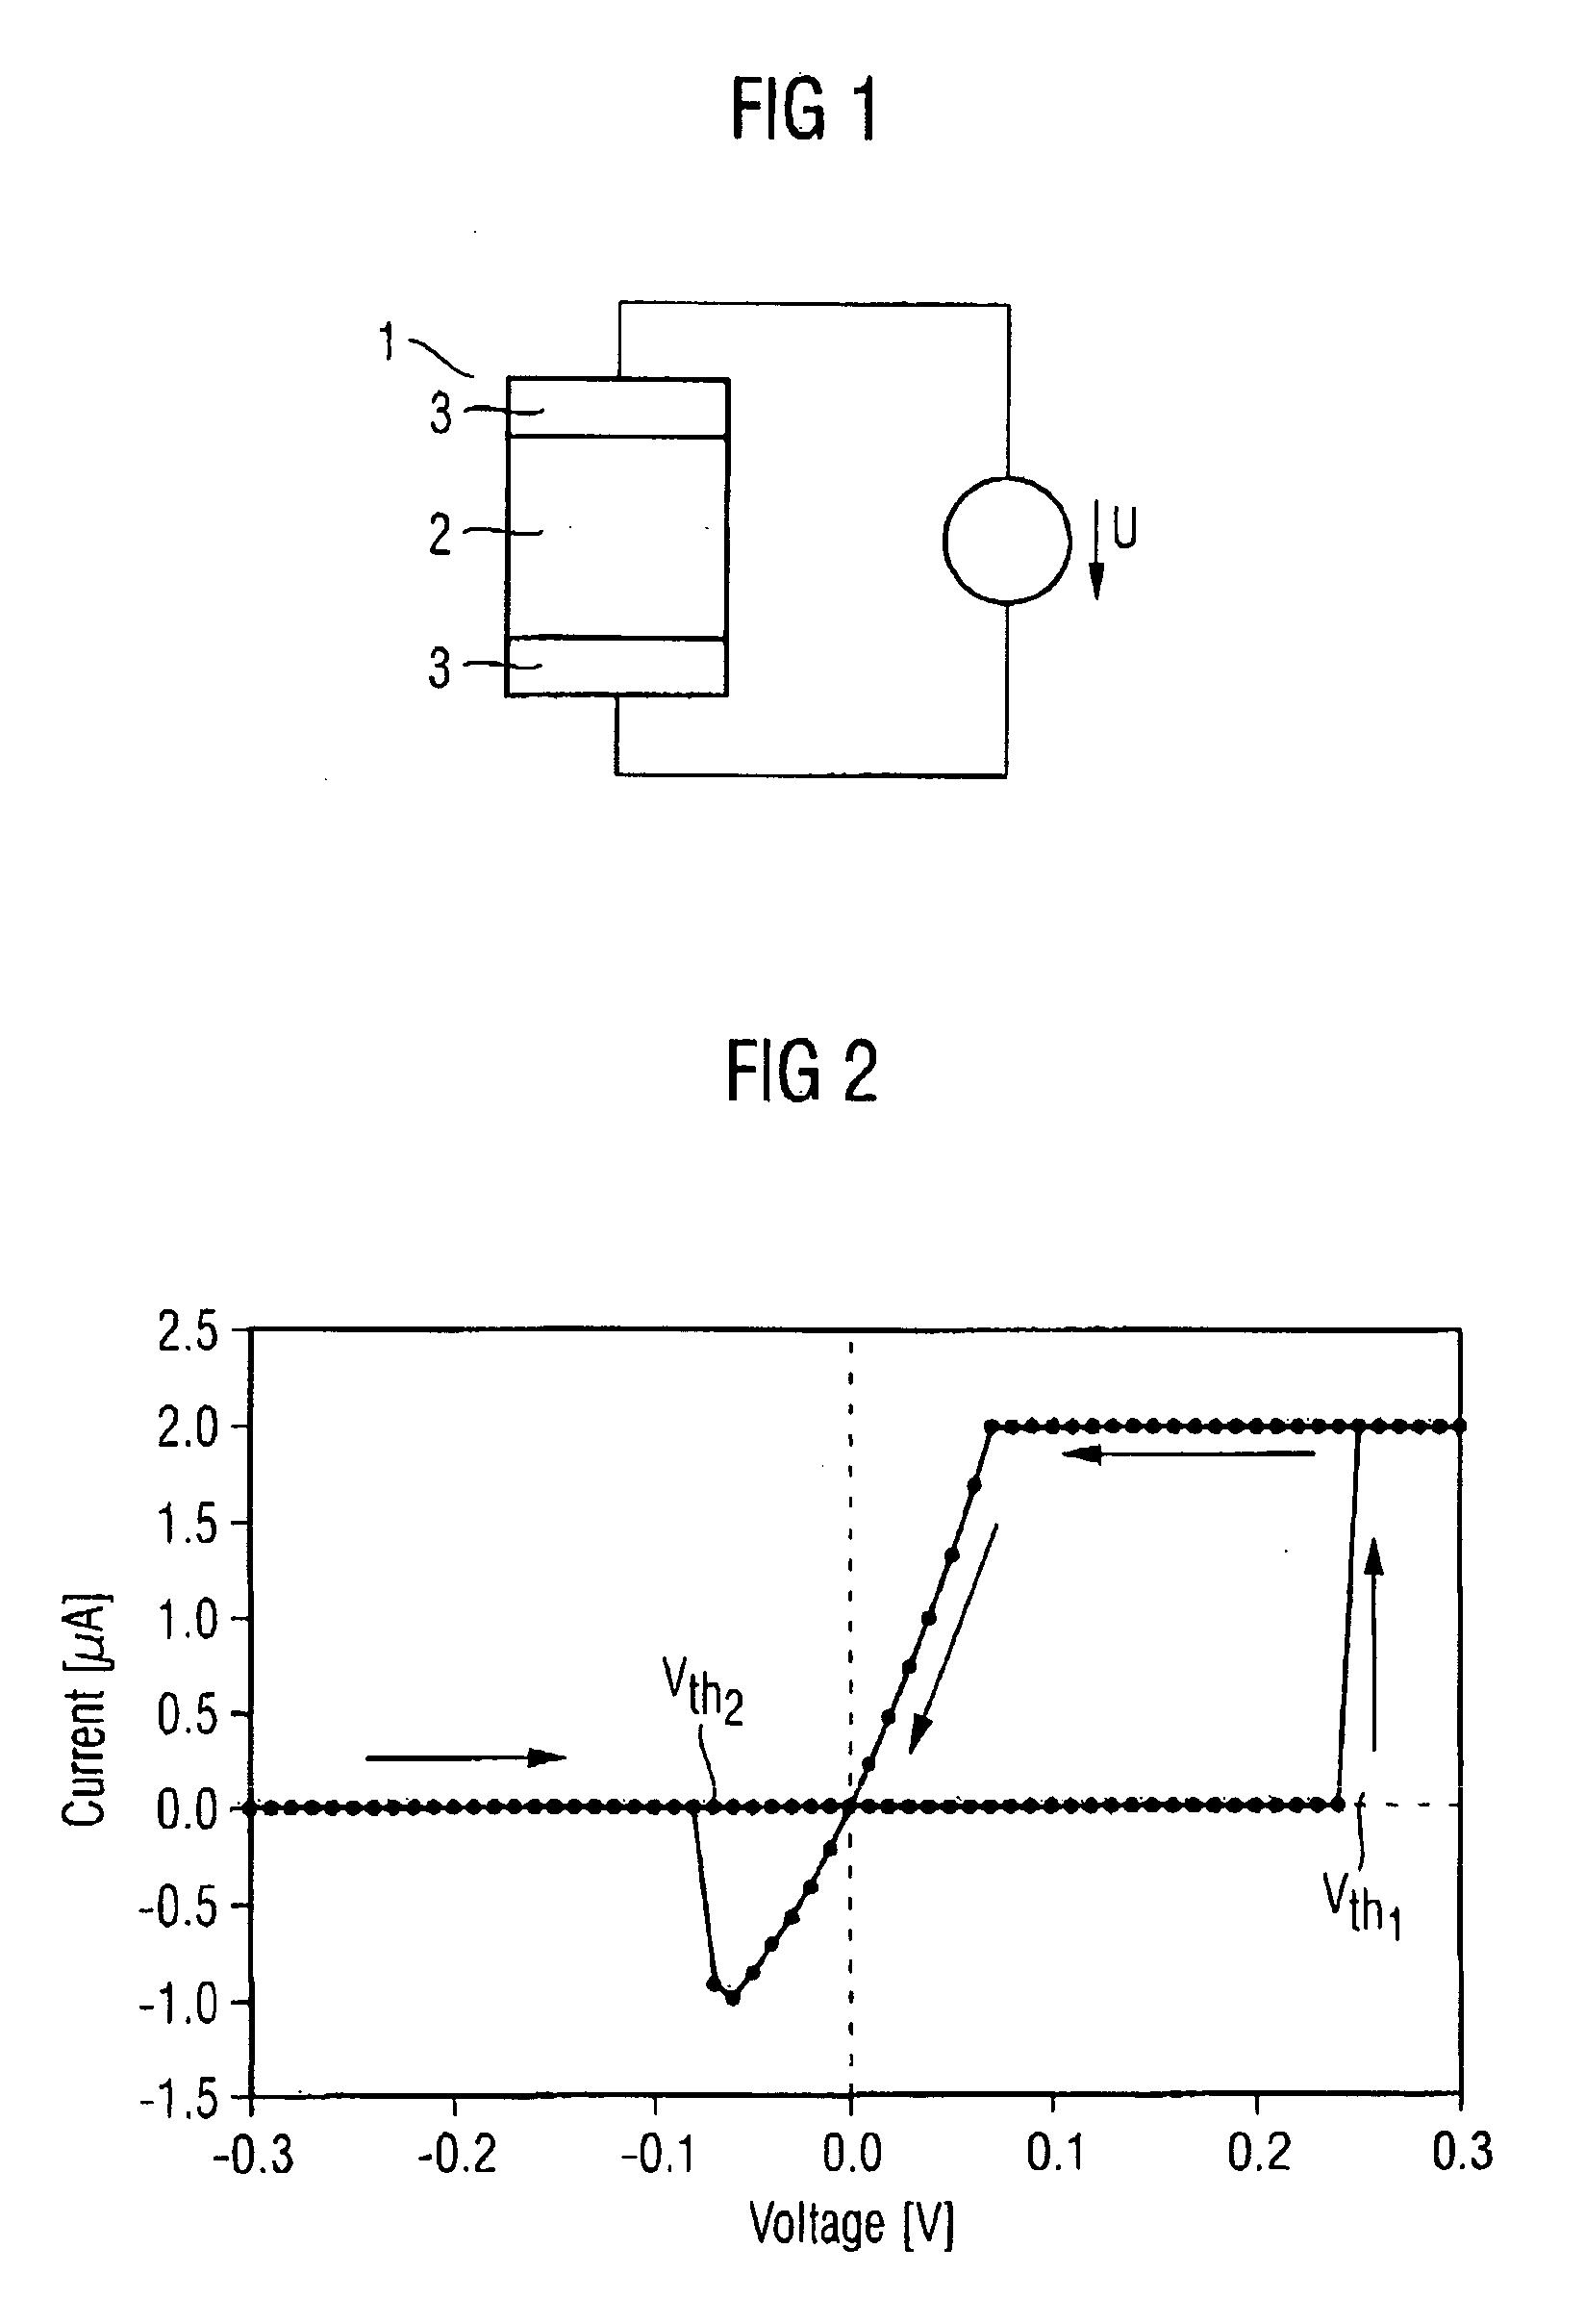 Memory circuit including a resistive memory element and method for operating such a memory circuit